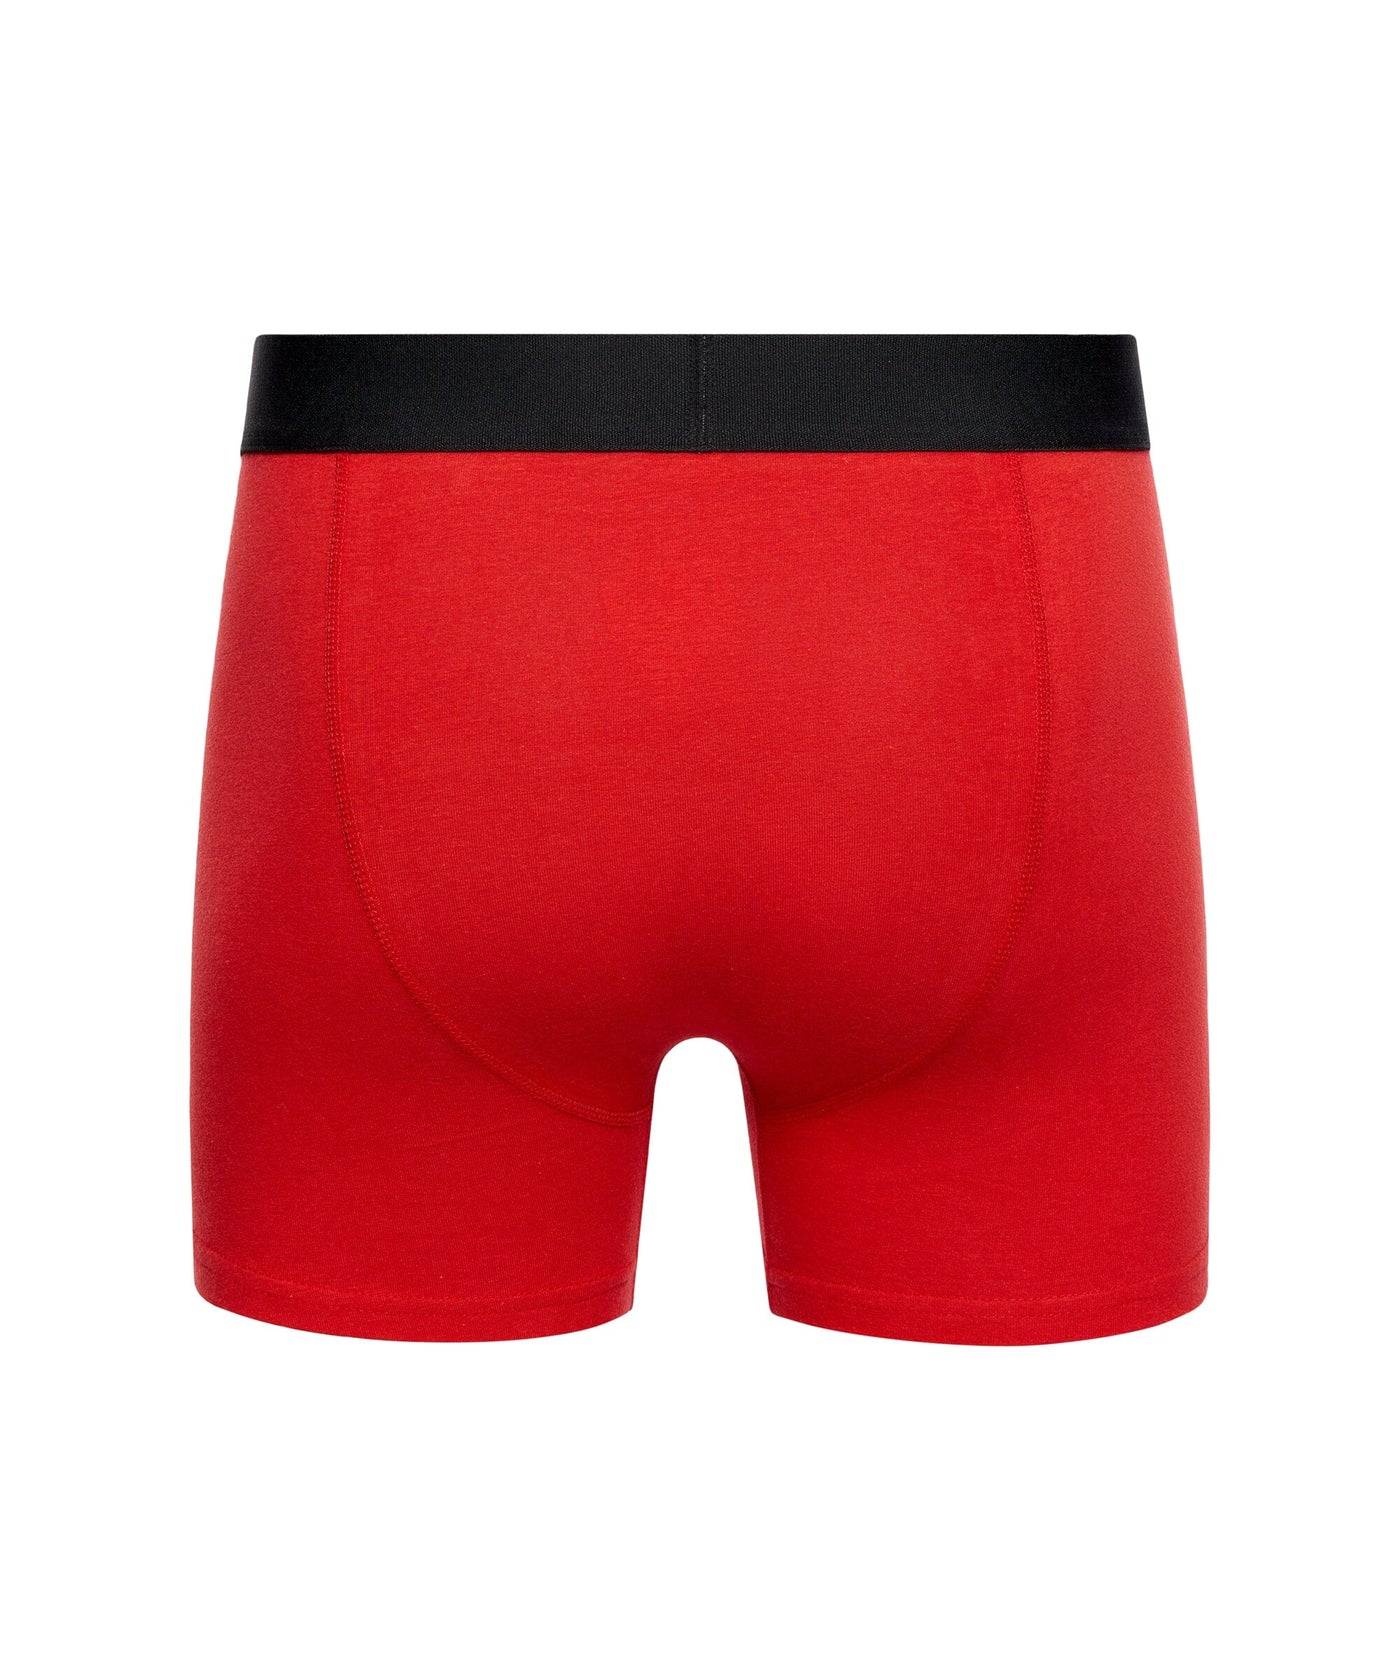 Mulbers Boxers 5pk Assorted